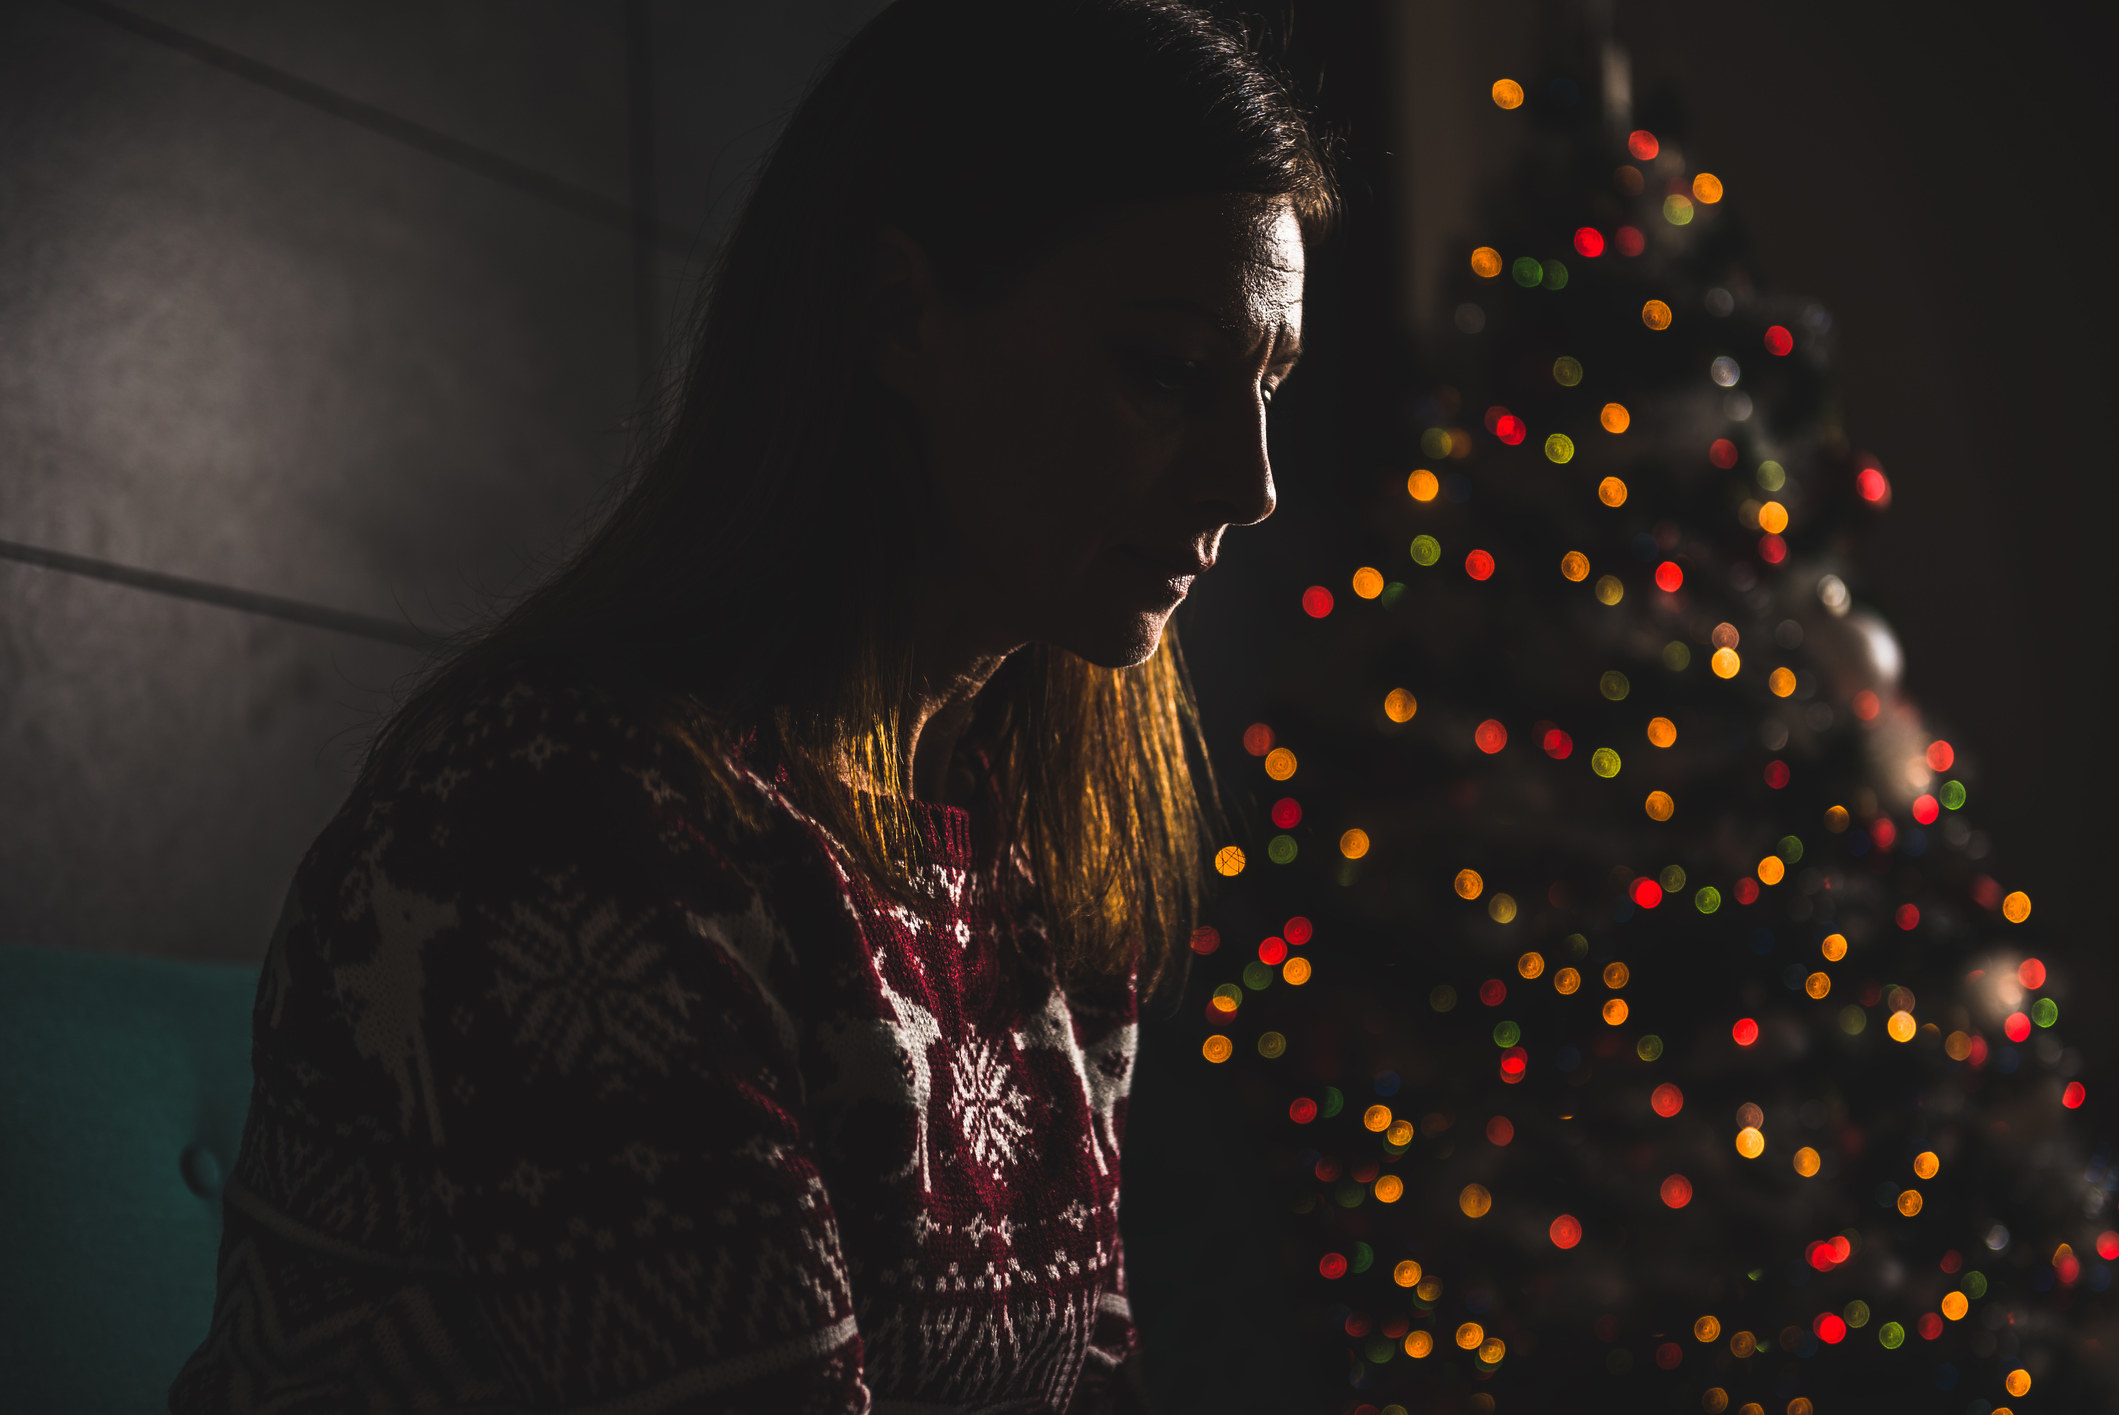 Someone looks devastated while sitting alone in the dark next to a Christmas tree